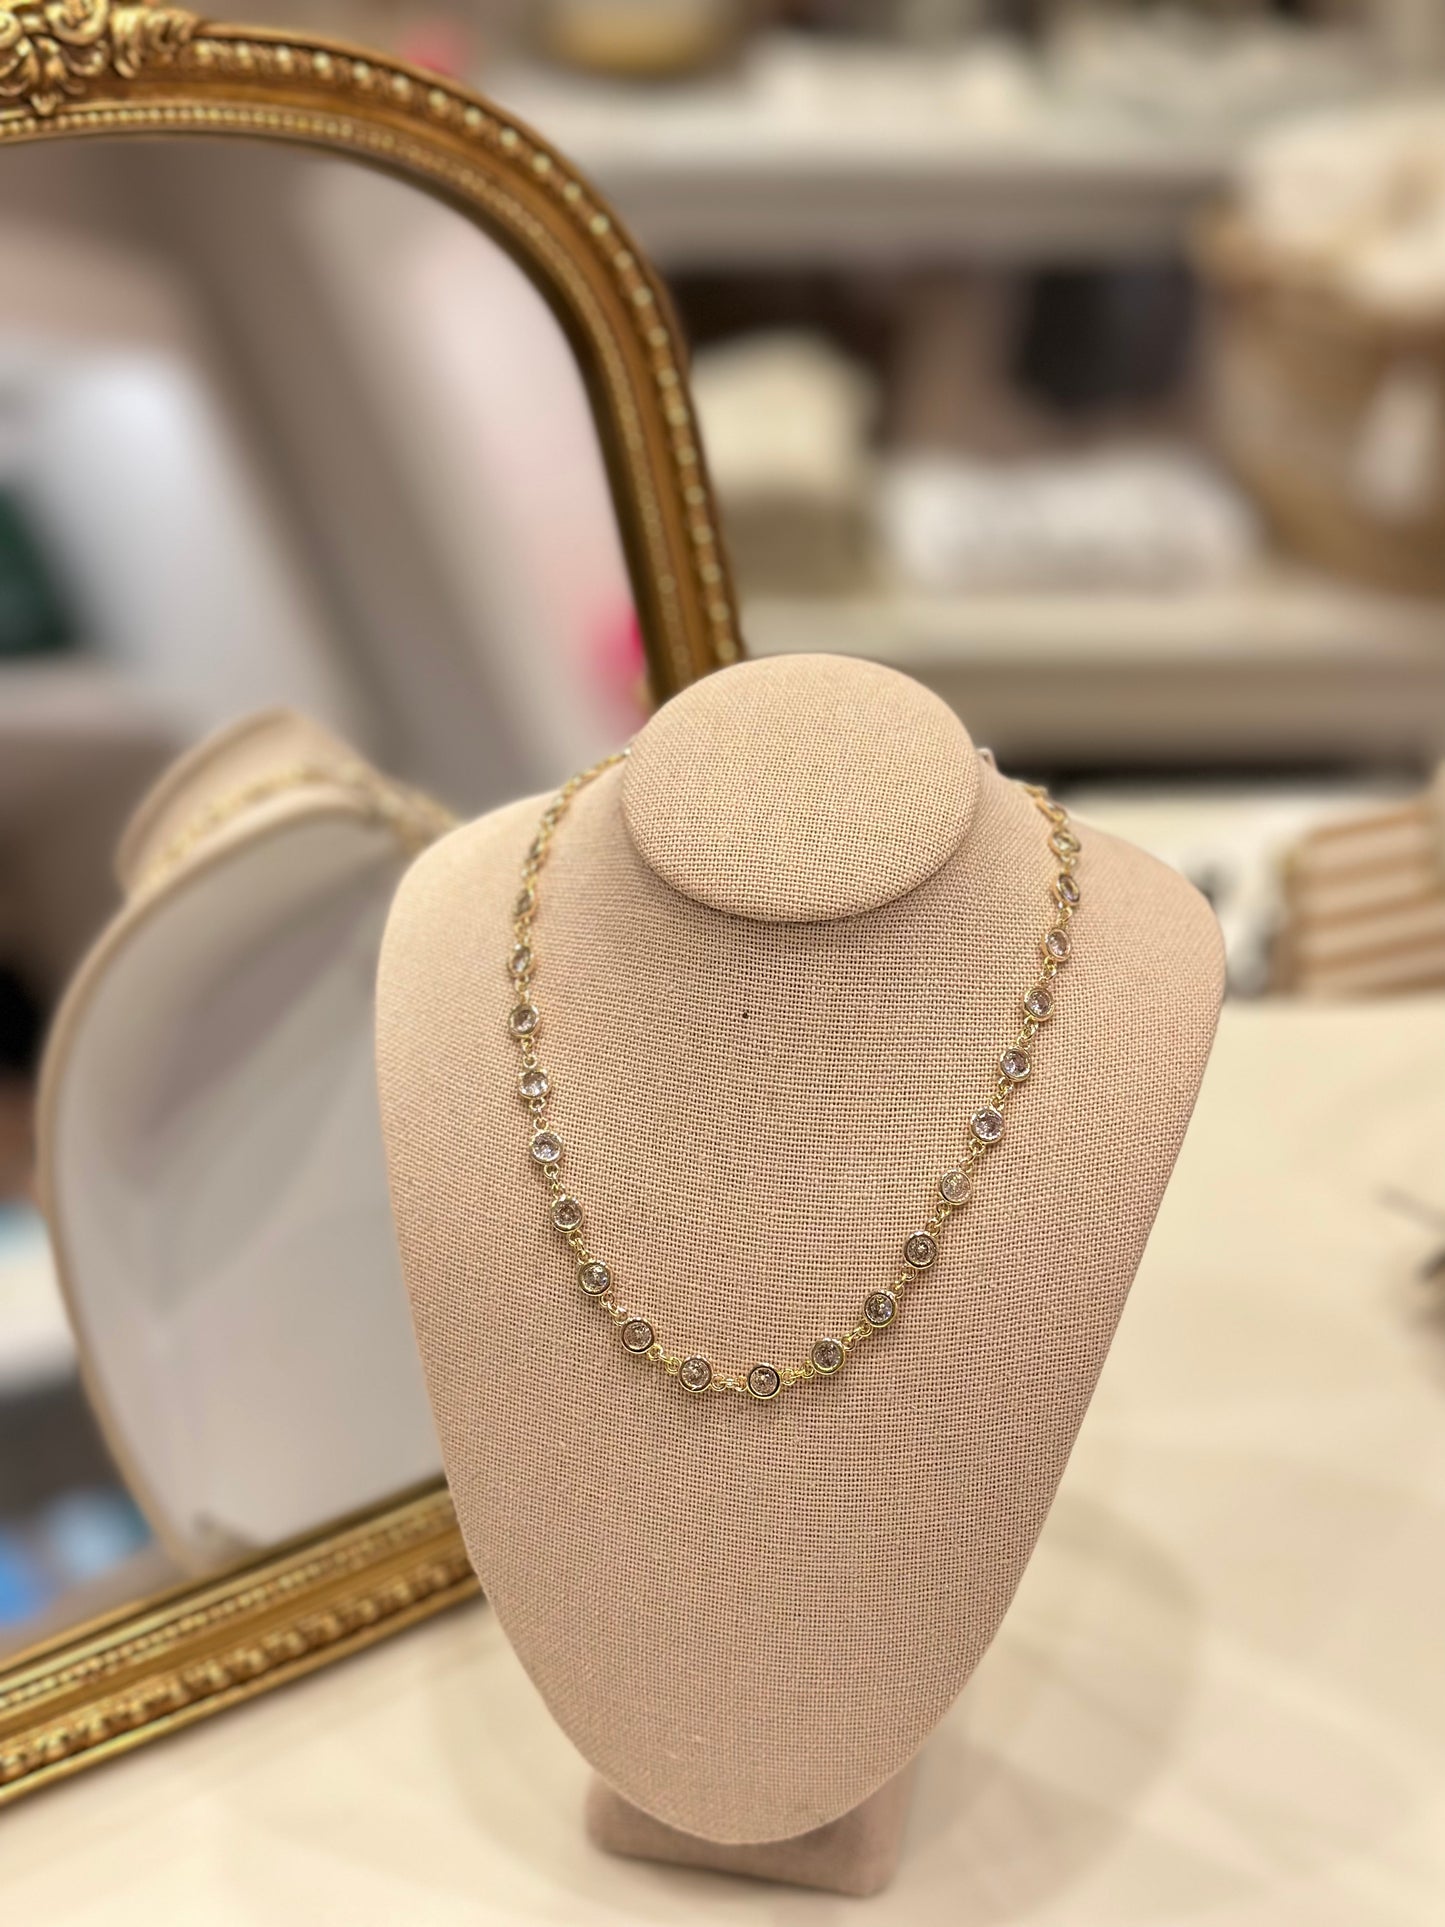 Gold Diamond by the Yard Necklace